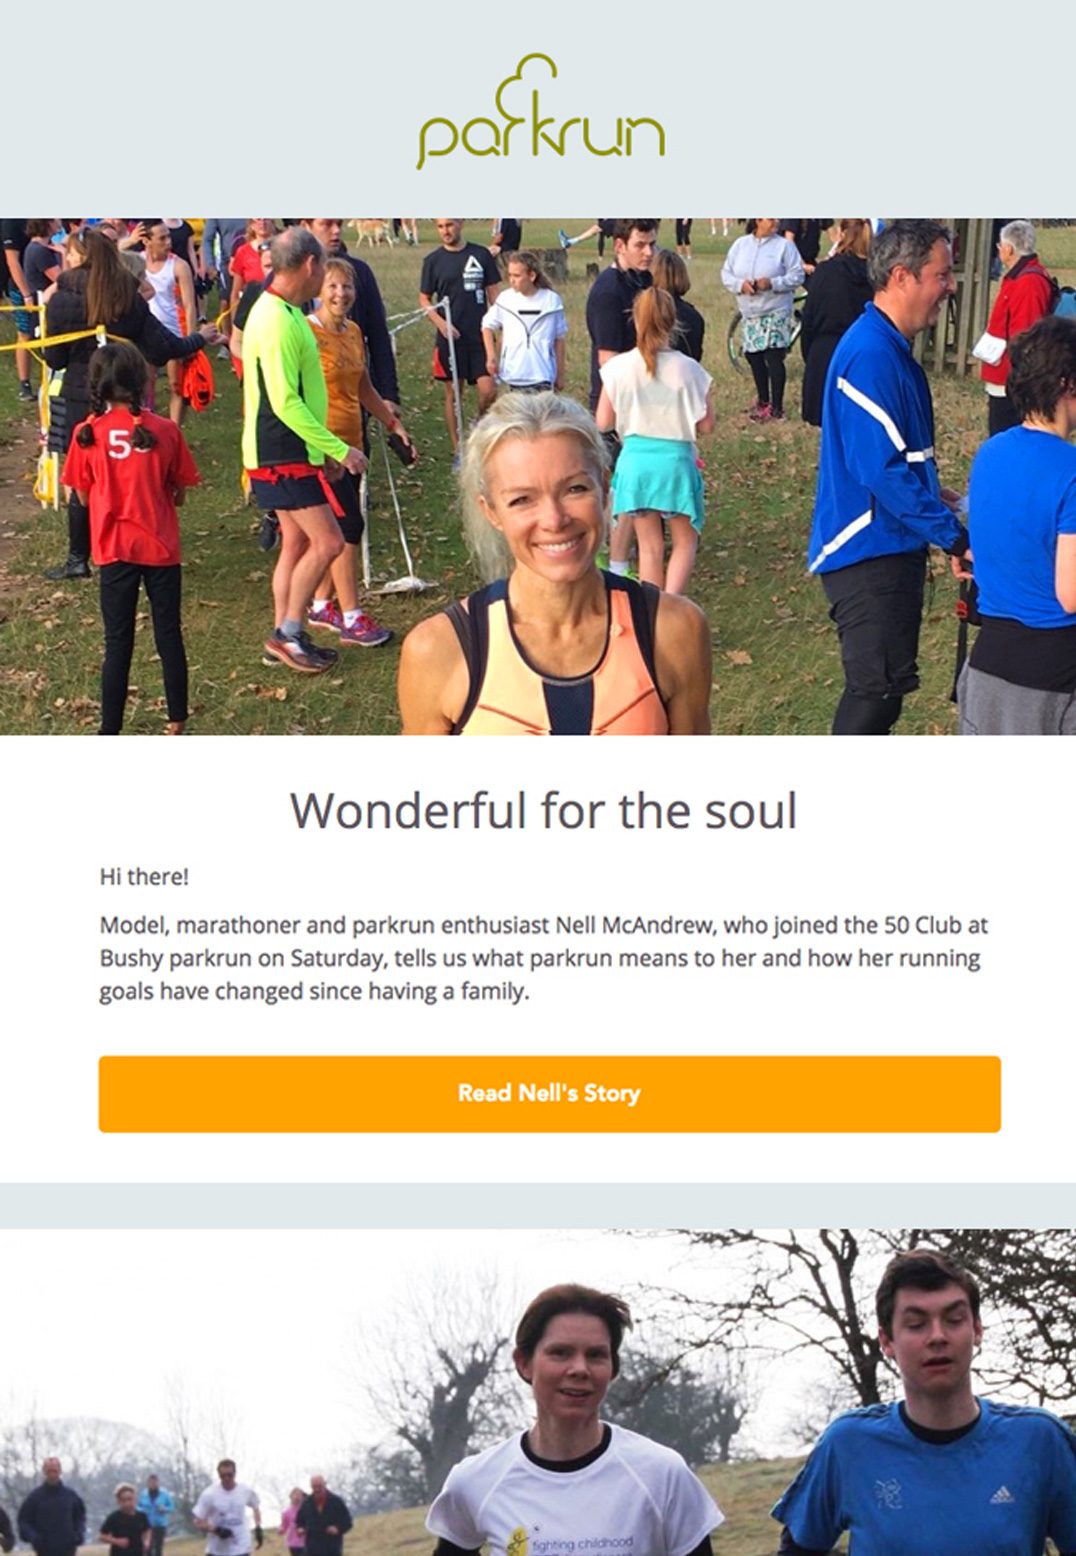 this parkrun example shows a picture of Nell, gives an intro about her, and has a cta "read nell's story"